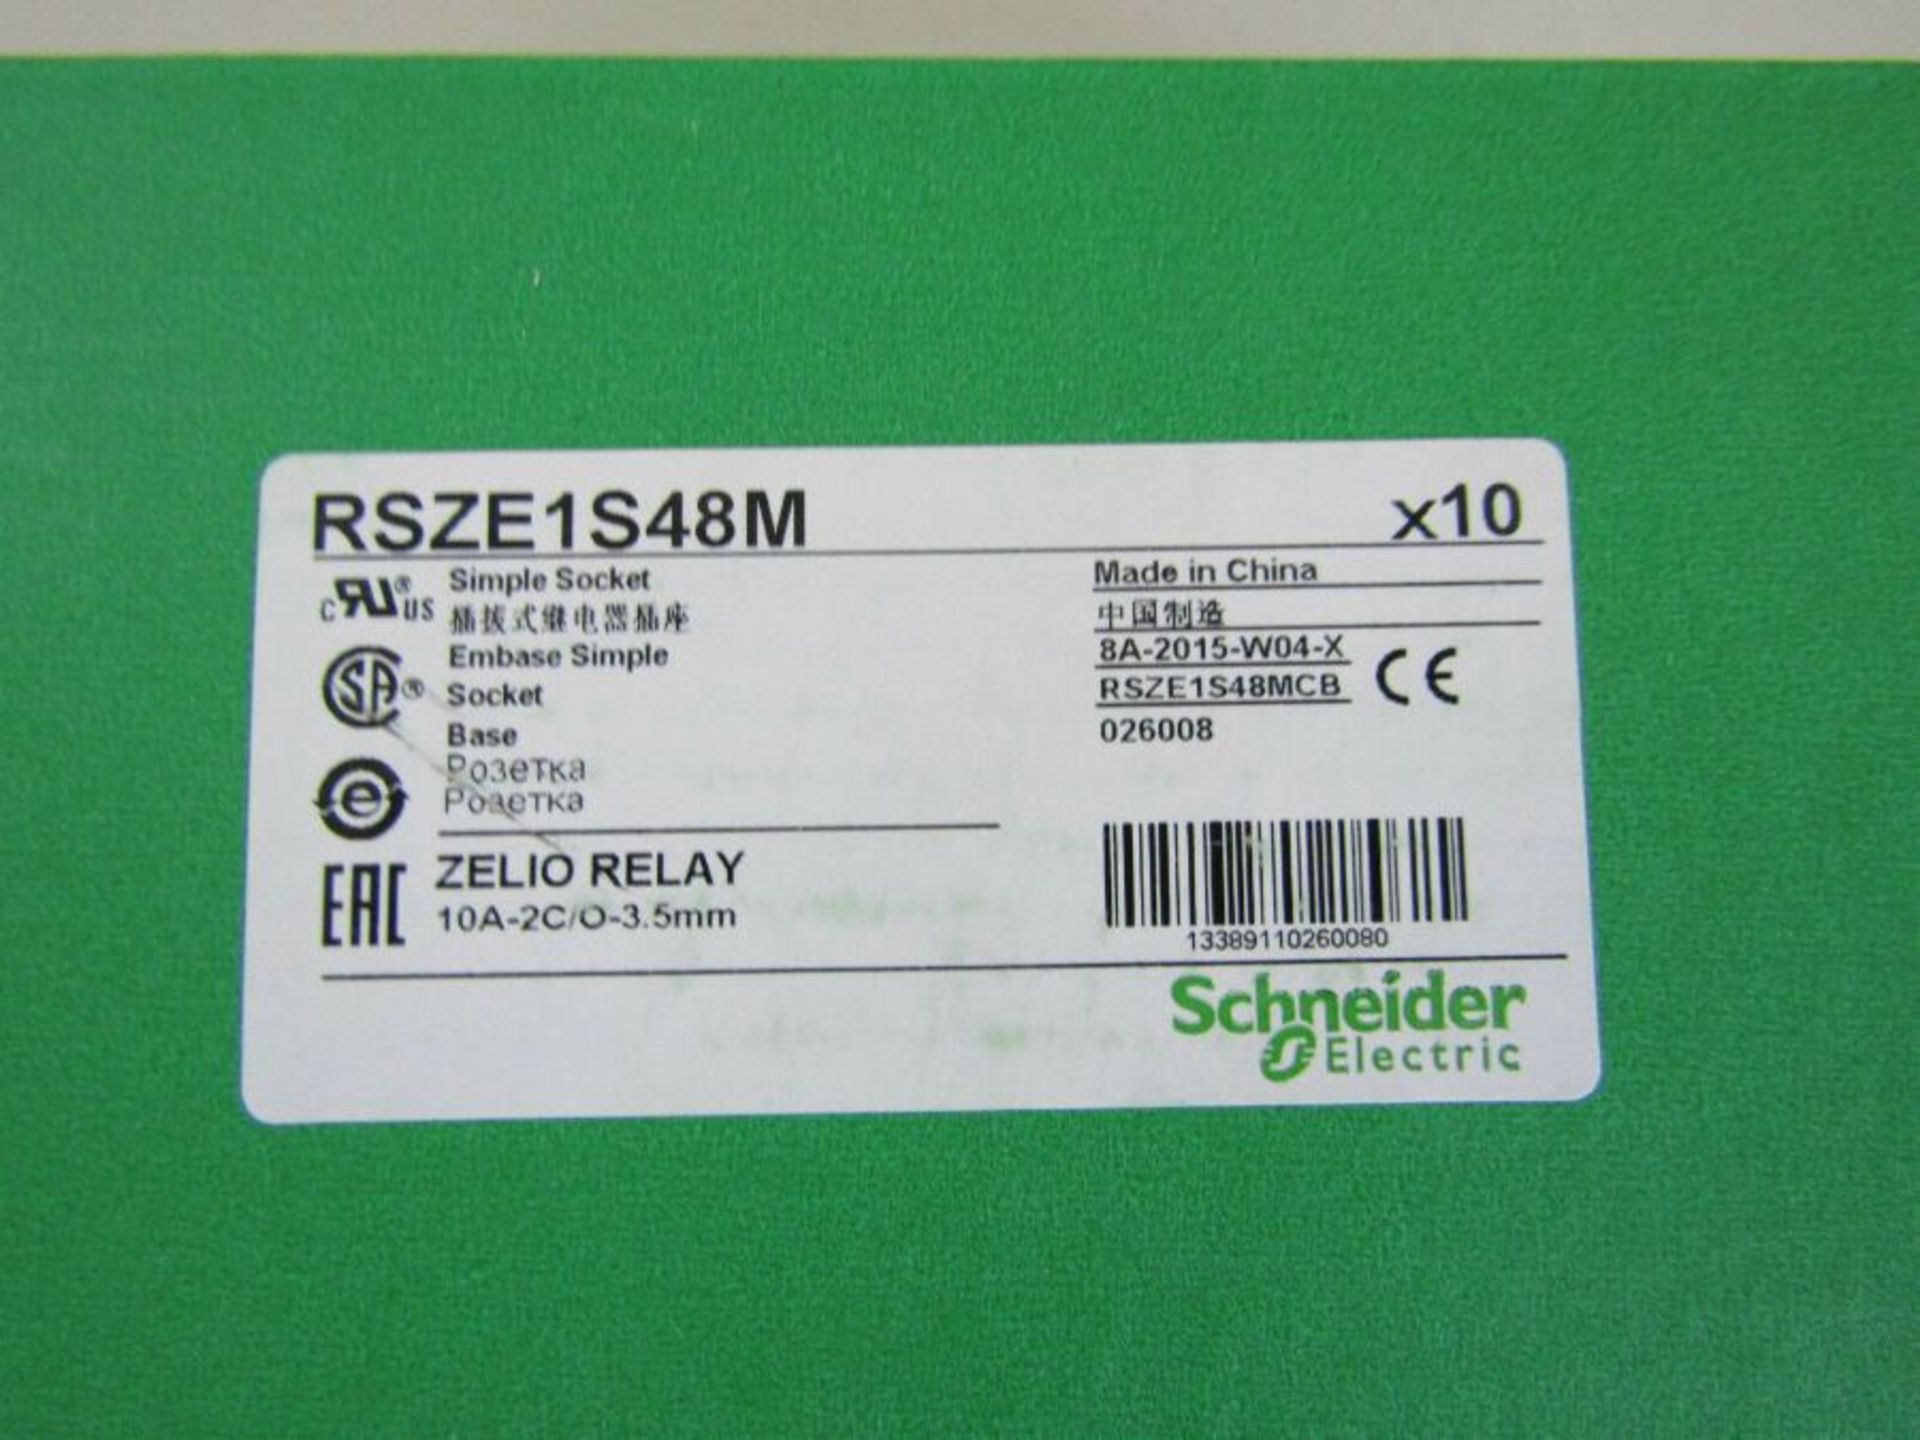 200 x SCHNEIDER RSZE1S48M Relay Socket for RSB Series - (20 boxes of 10) S2 - 8497667 - Image 3 of 3